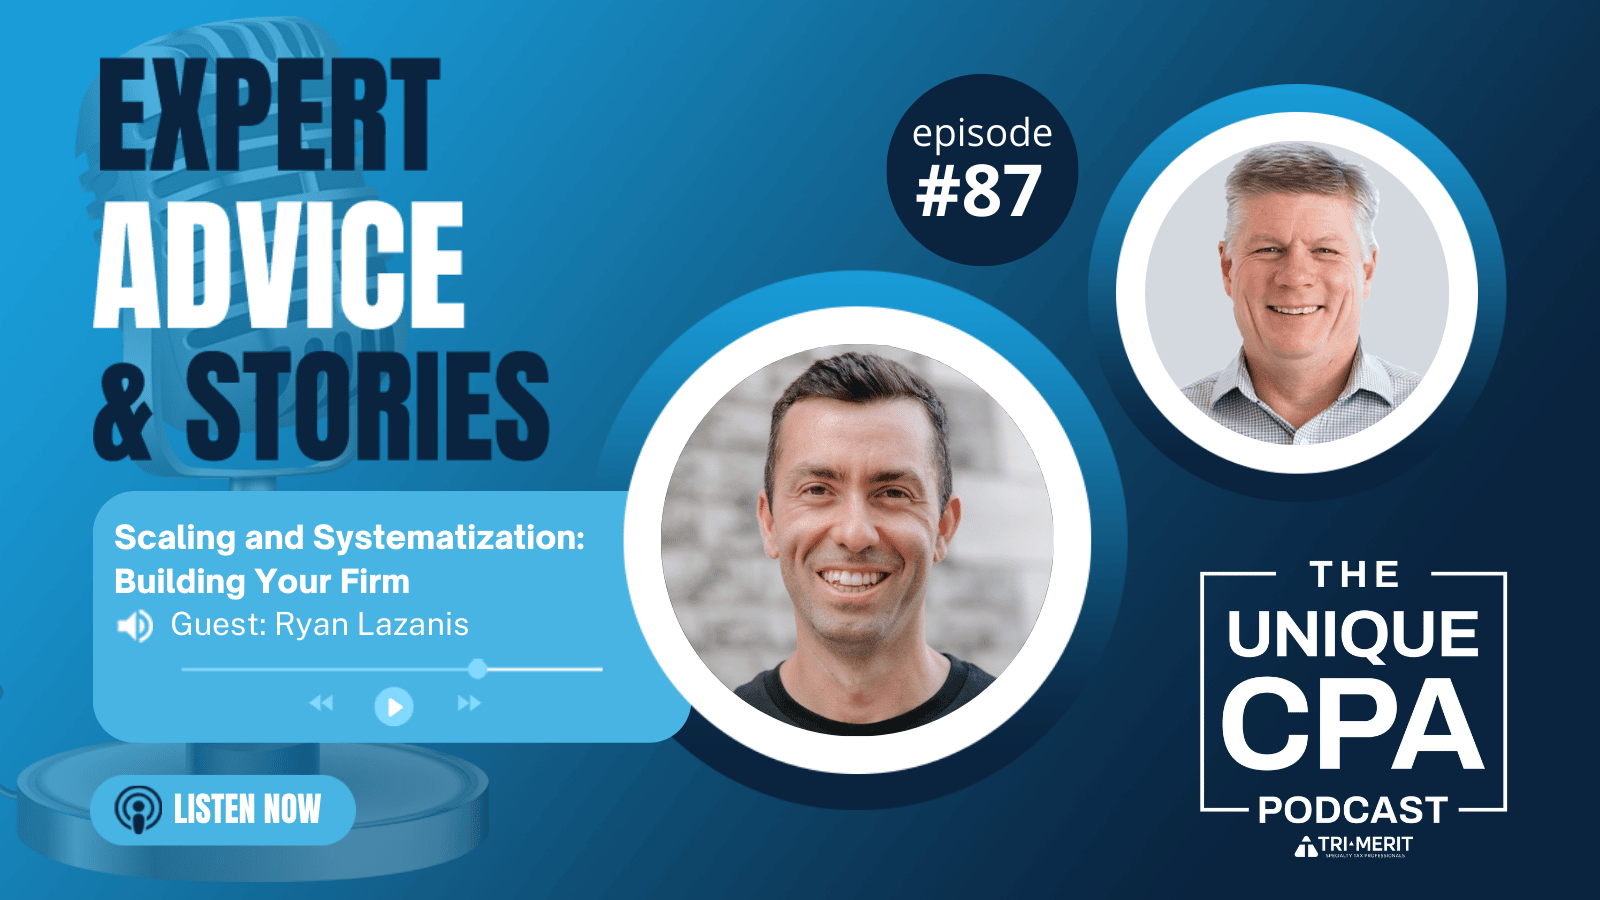 Unique Cpa Featured Image Ep 87 Ryan Lazanis - Scaling And Systematization - Tri-Merit